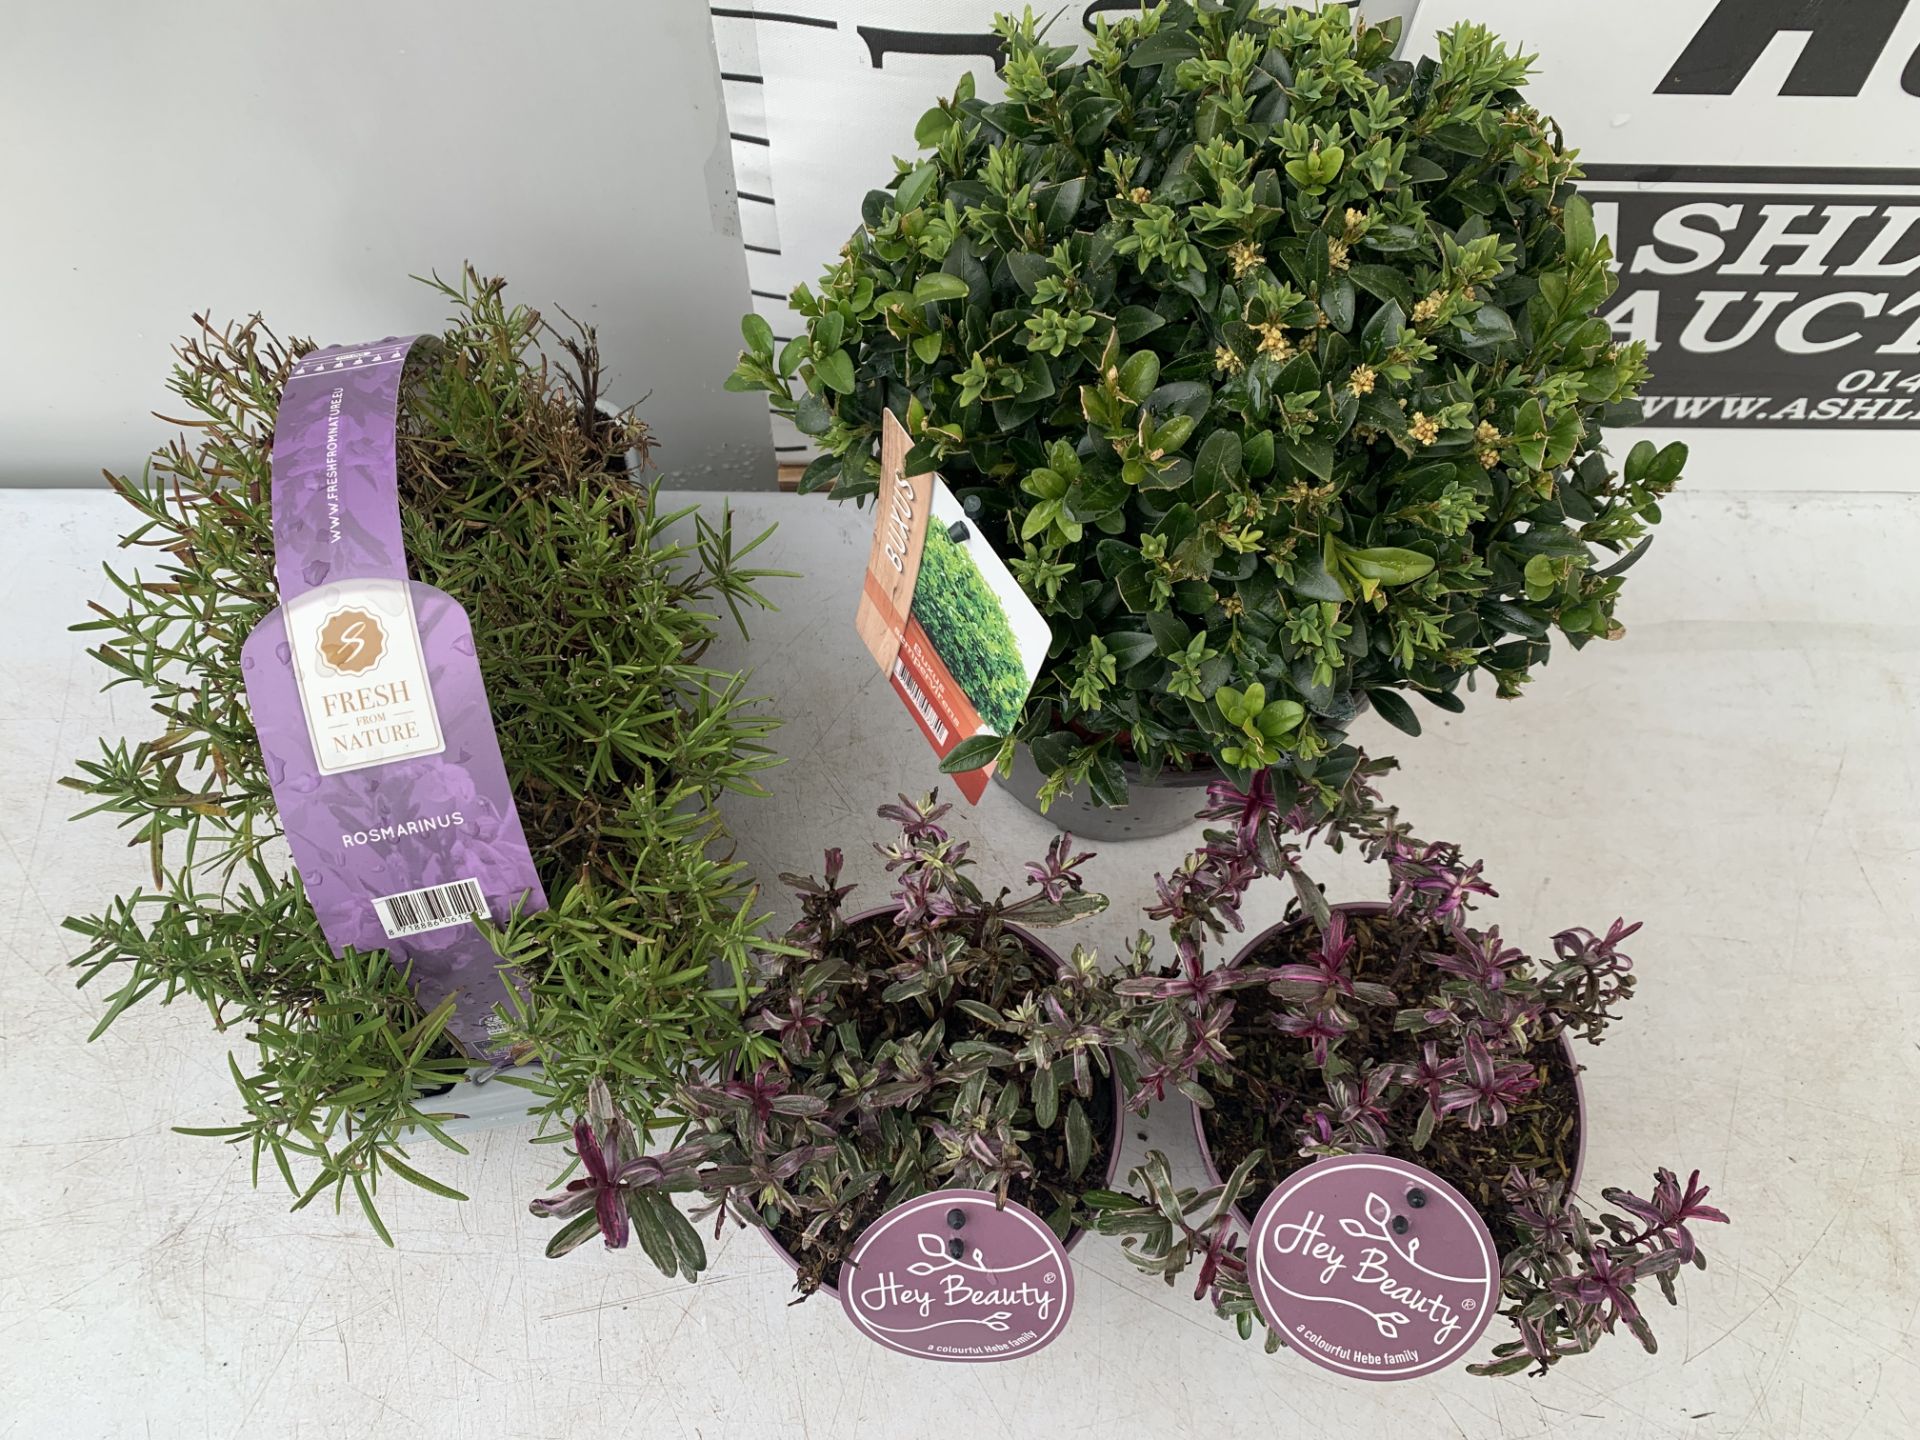 MIXED LOT OF PLANTS - ONE BUXUS SEMPERVIRENS IN A 2 LTR POT, SIX ROSEMARY PLUG PLANTS IN A CARRY - Image 3 of 10